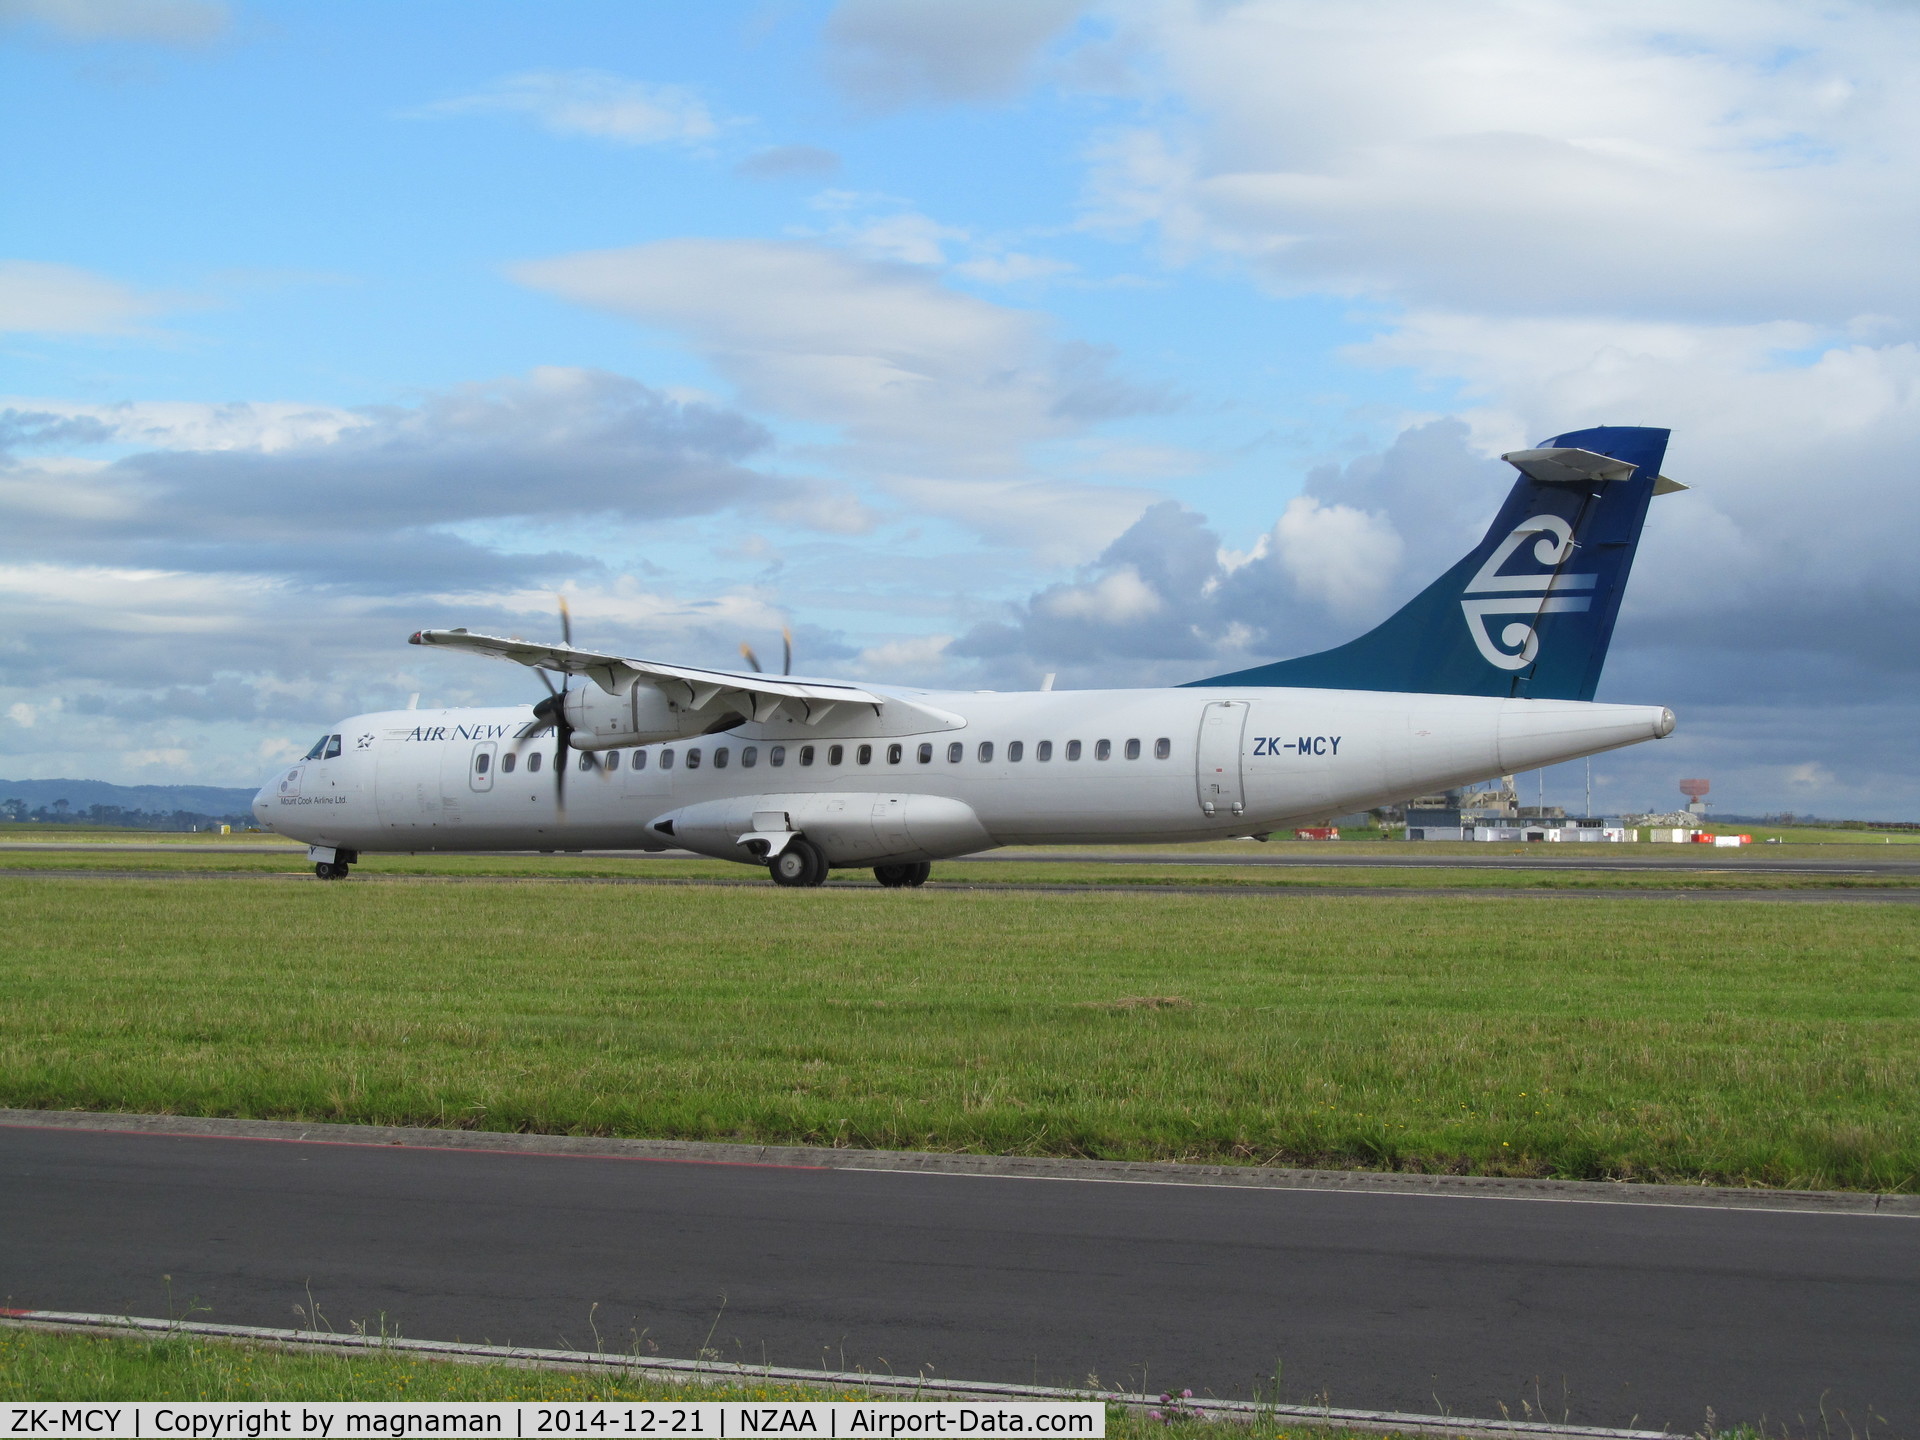 ZK-MCY, 2003 ATR 72-212A C/N 703, on taxiway for departure